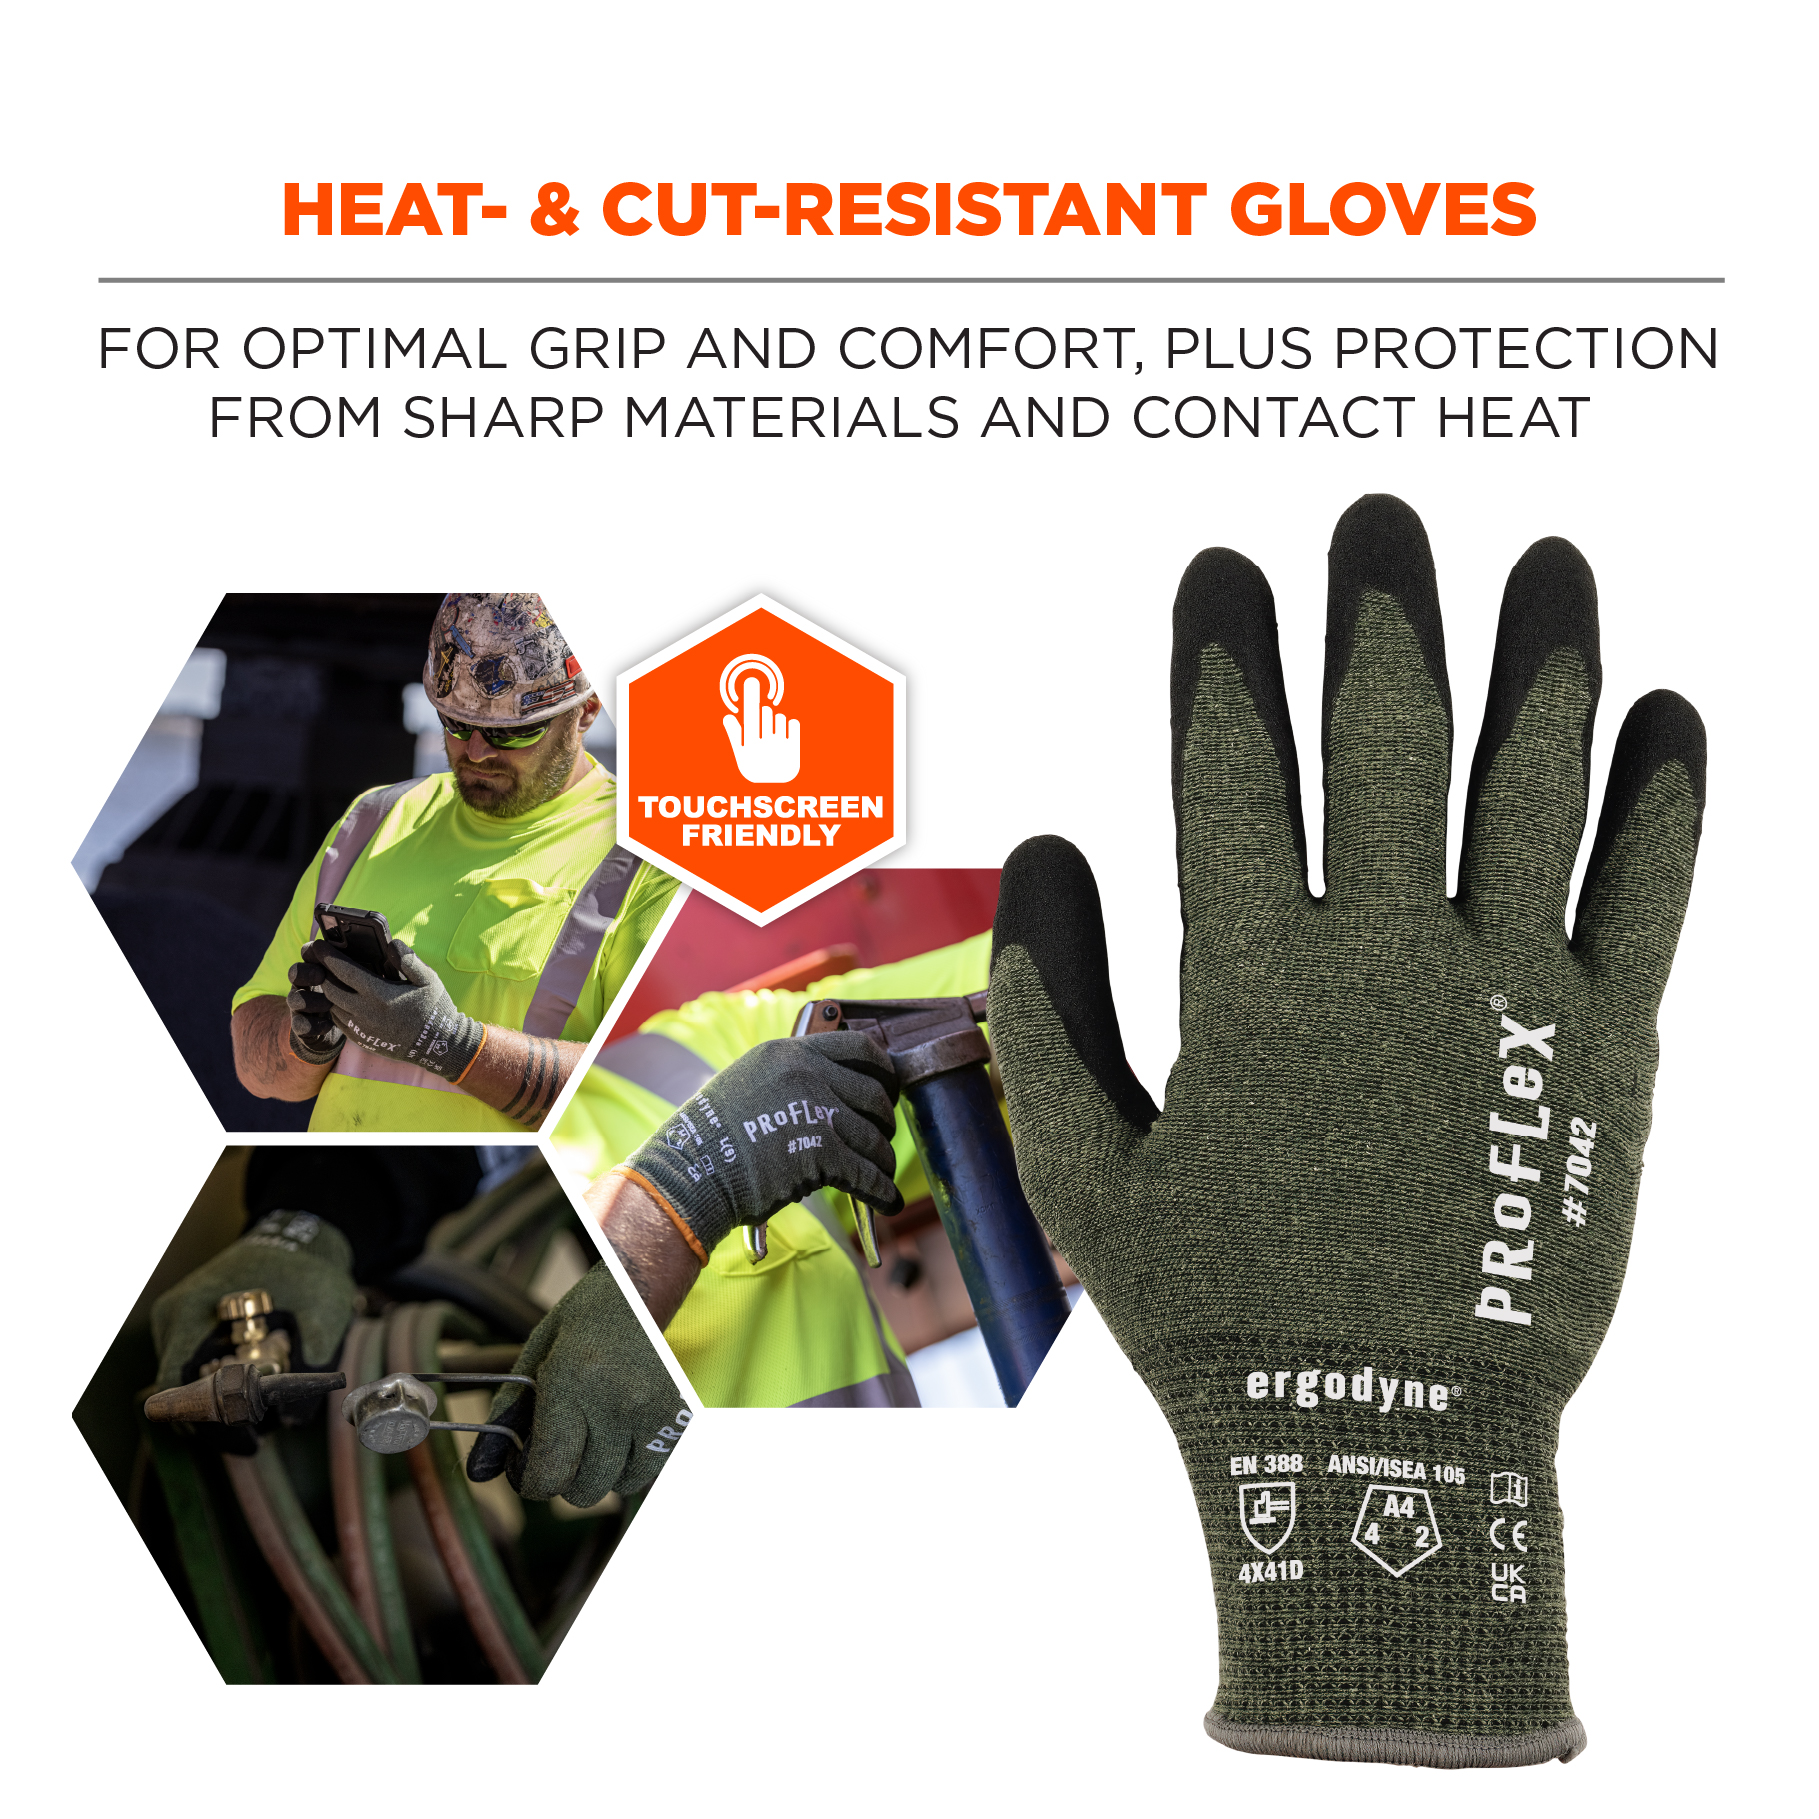 2 Pairs Impact Resistant Work Gloves Coated Vibration Protection Safety Grip  XXL